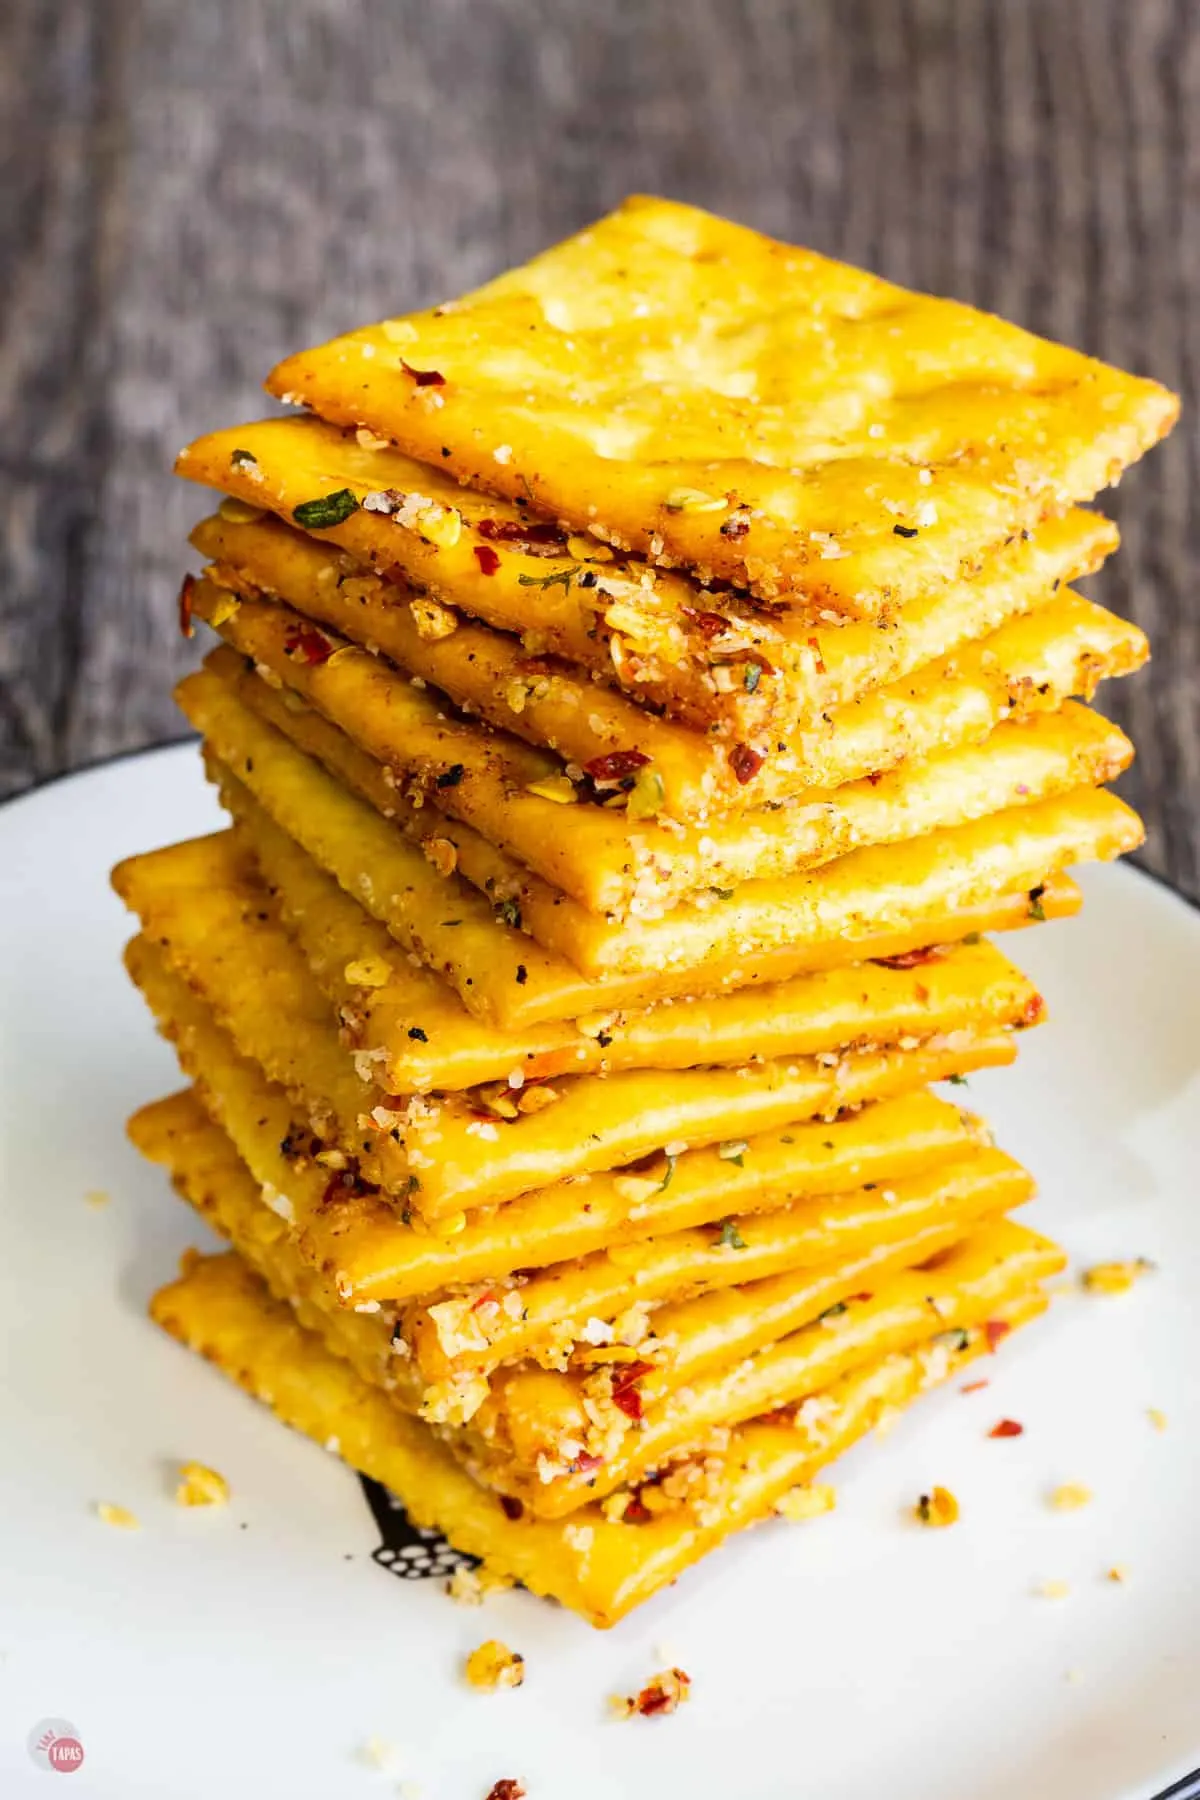 stack of crackers